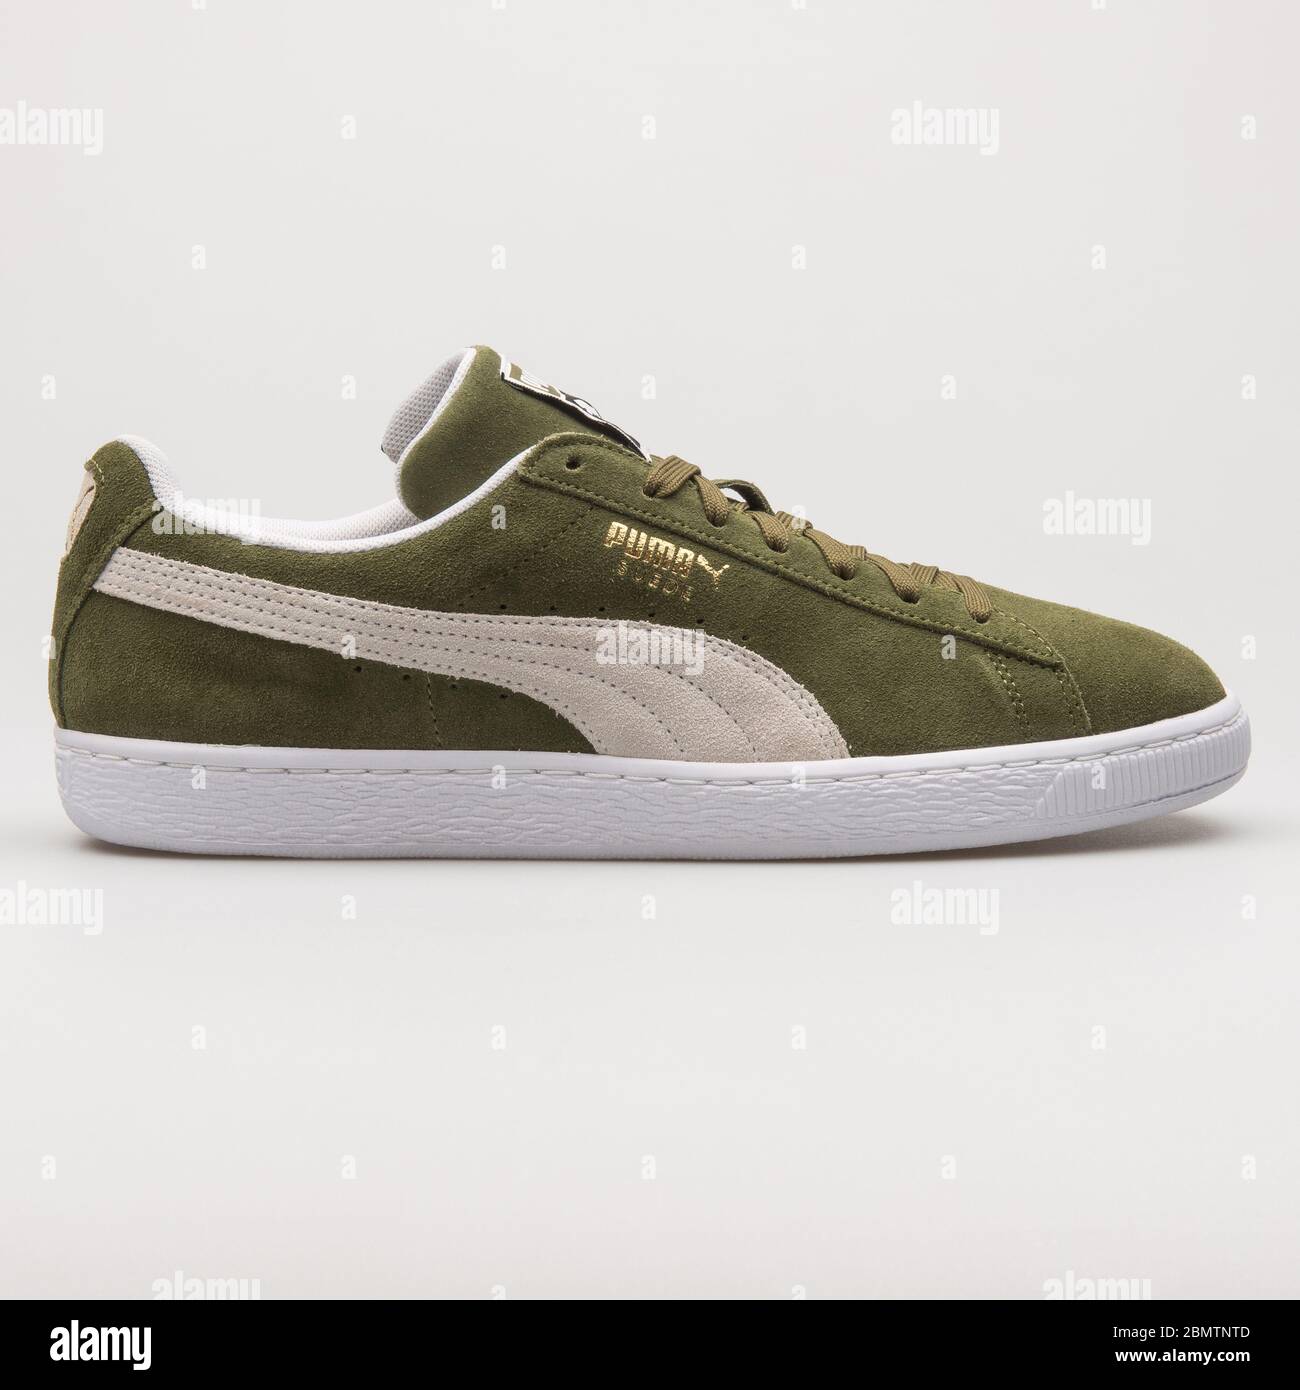 VIENNA, AUSTRIA - FEBRUARY 19, 2018: Puma Suede Classic olive green and  white sneaker on white background Stock Photo - Alamy